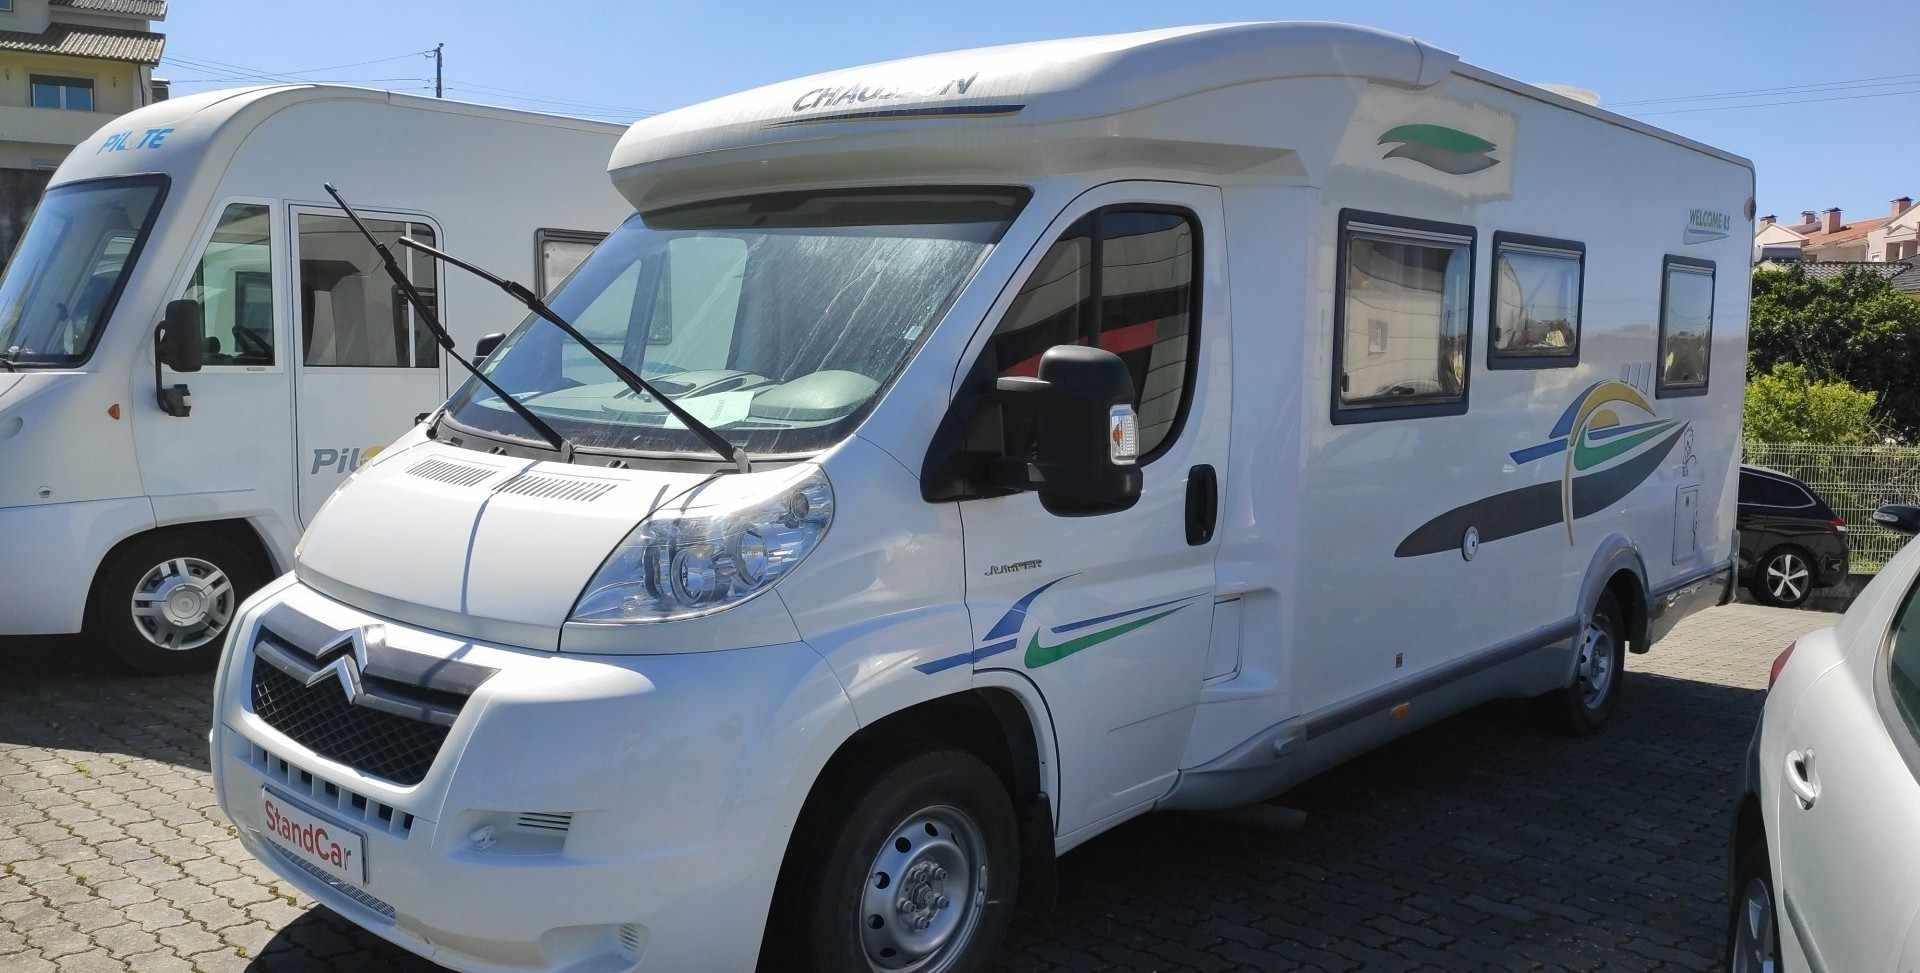 Chausson welcome 85 2009